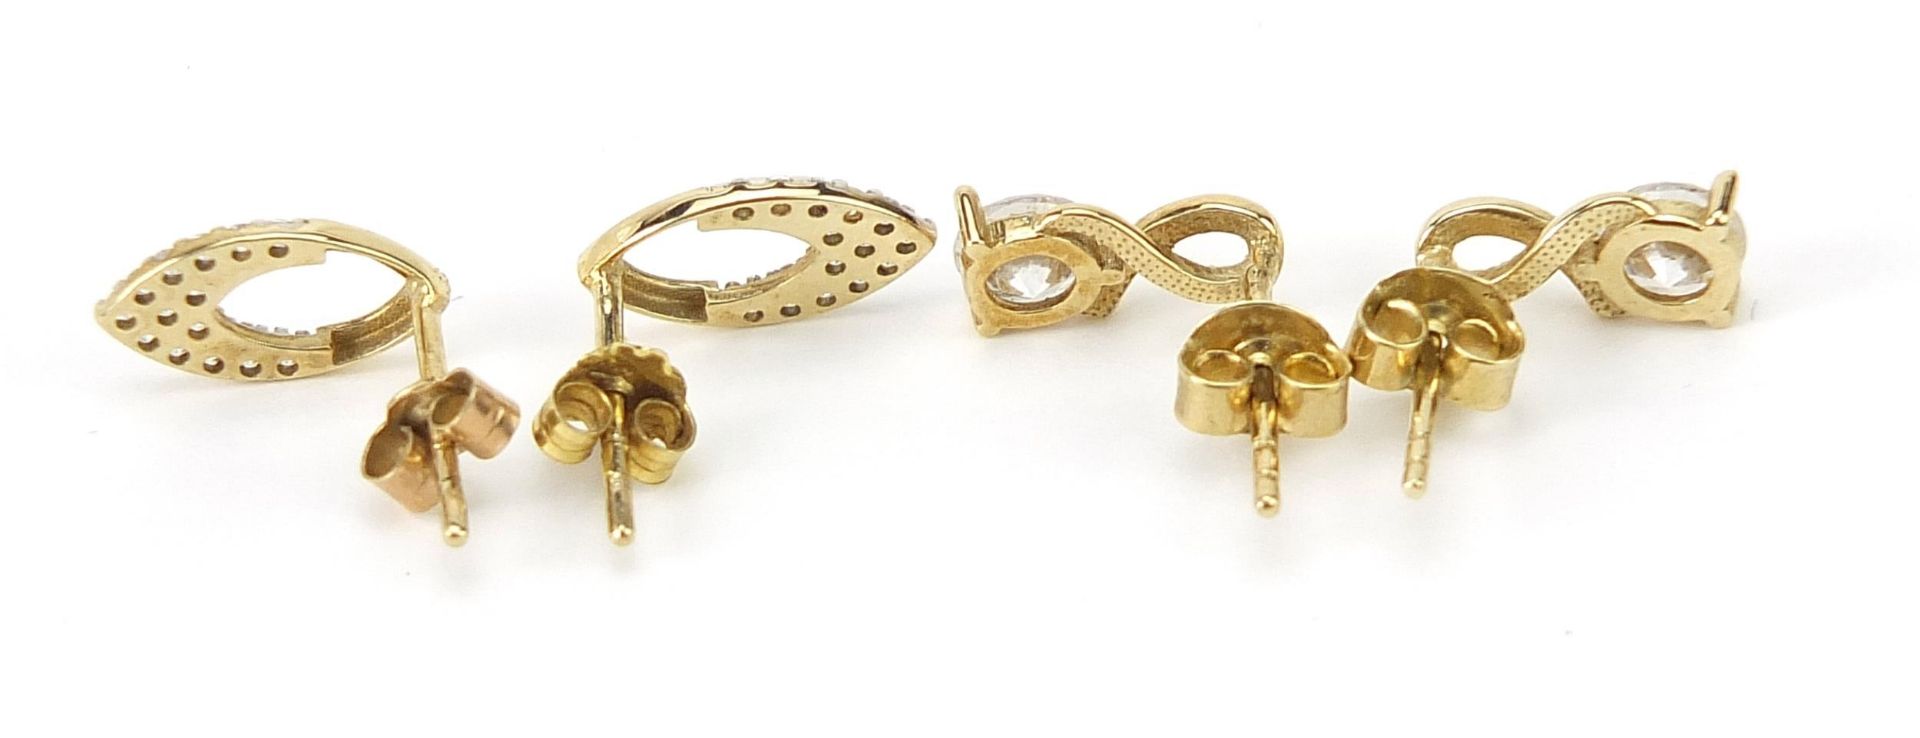 Two pairs of 9ct gold clear stone stud earrings, the largest 1.1cm high, total 2.1g - Image 3 of 3